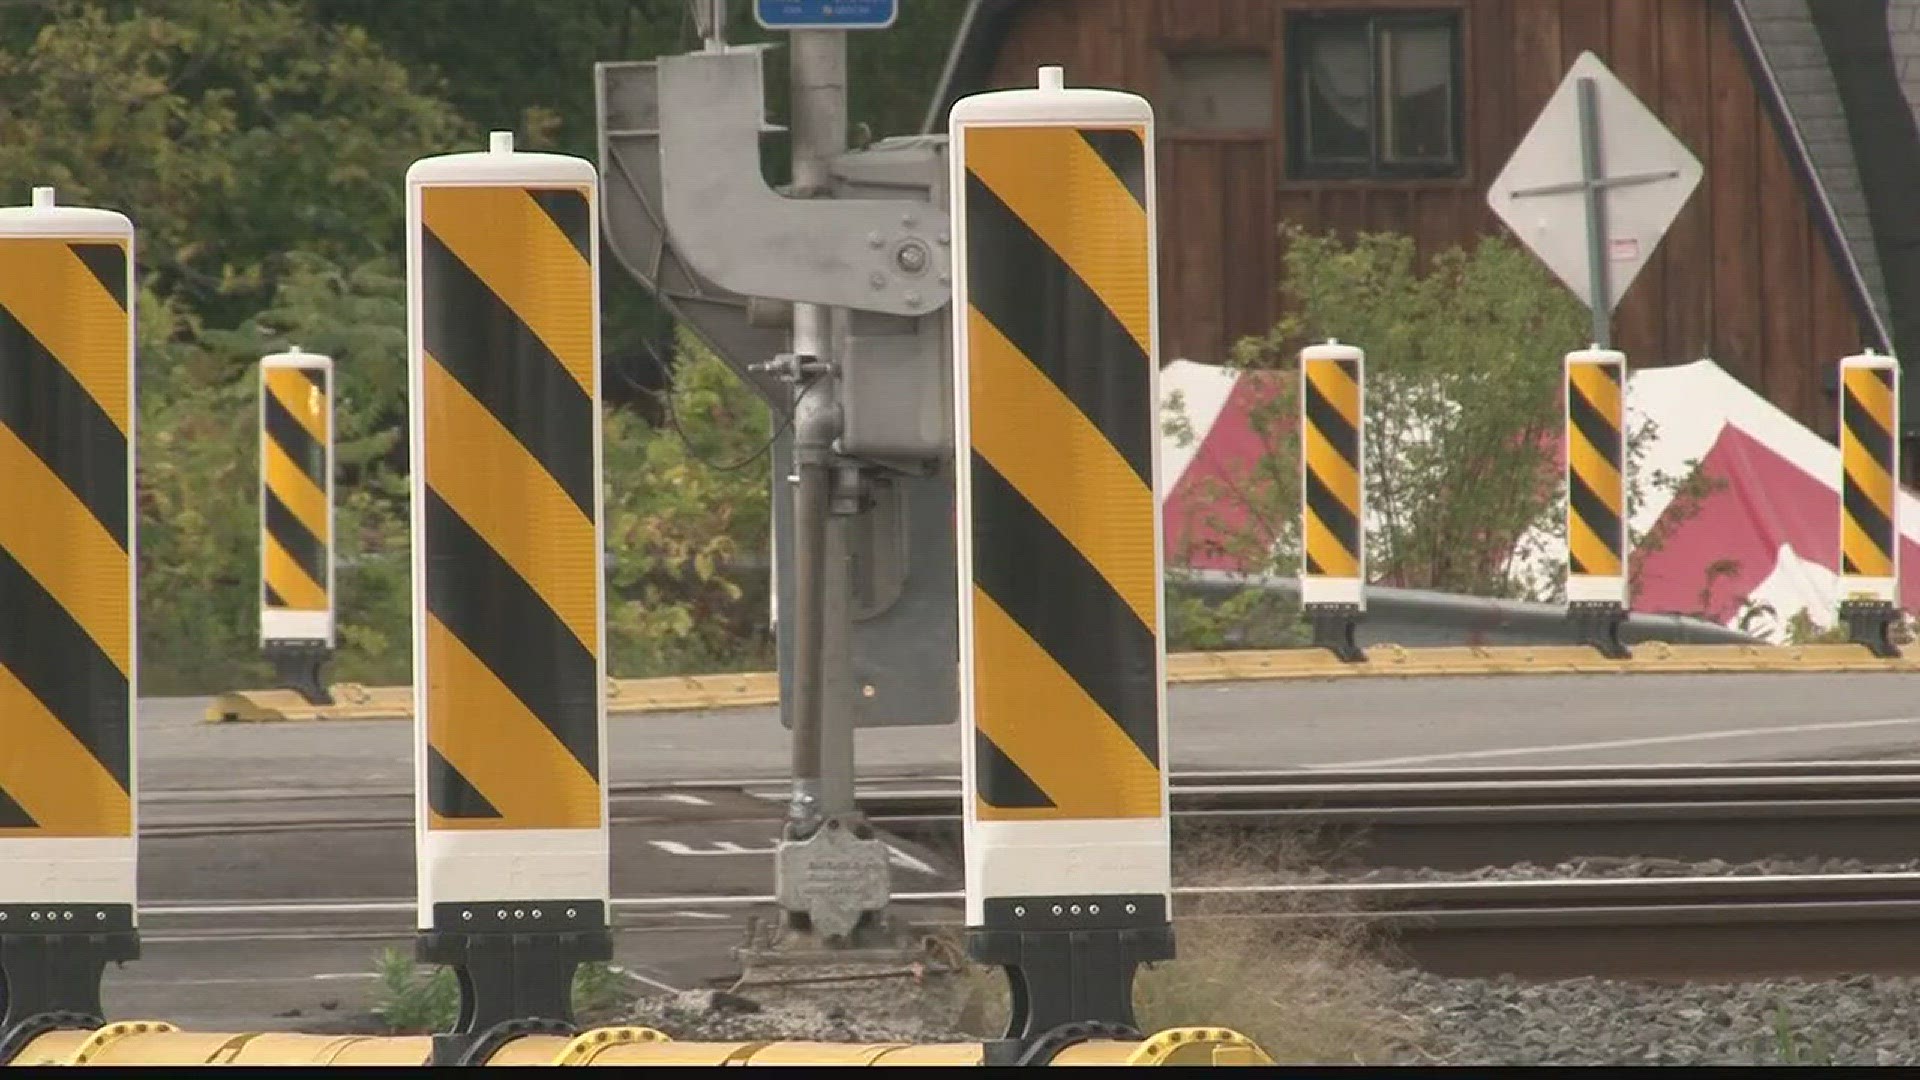 Channel 2's Heather Ly reports on so-called "quiet zones" near train tracks in Hamburg and when neighbors can finally expect some peace and quiet.